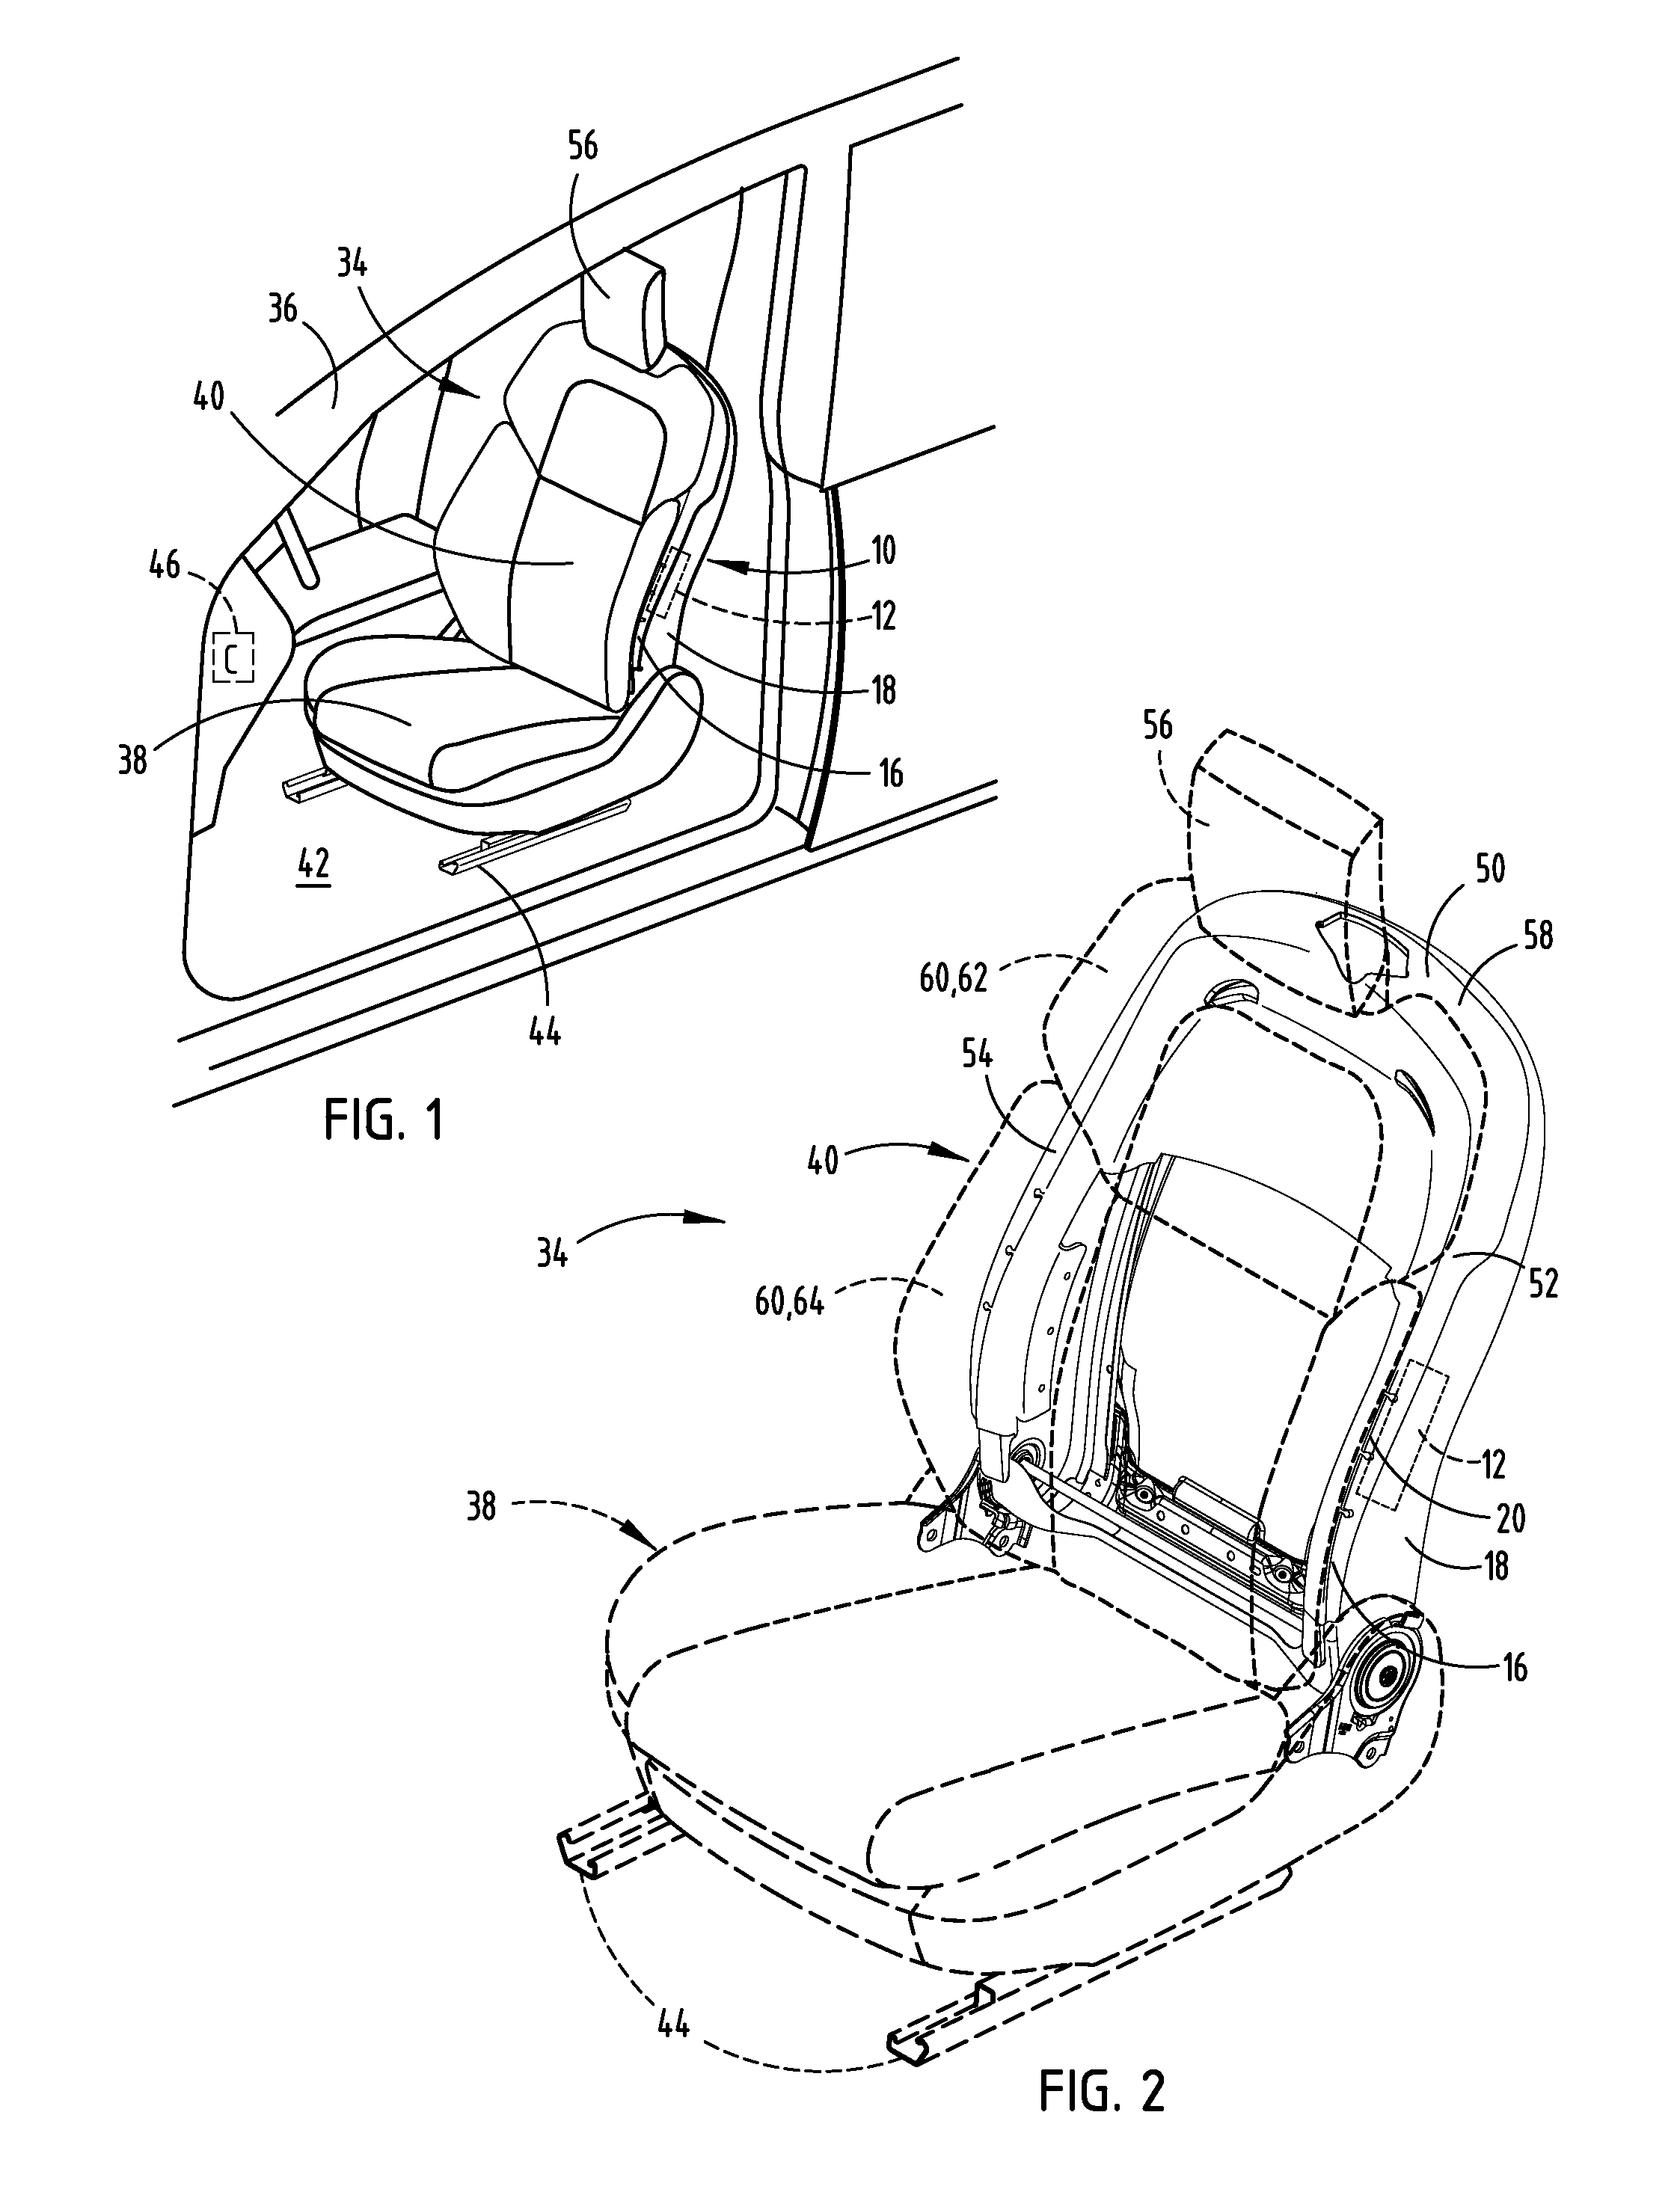 Side airbag assembly for a vehicle seat